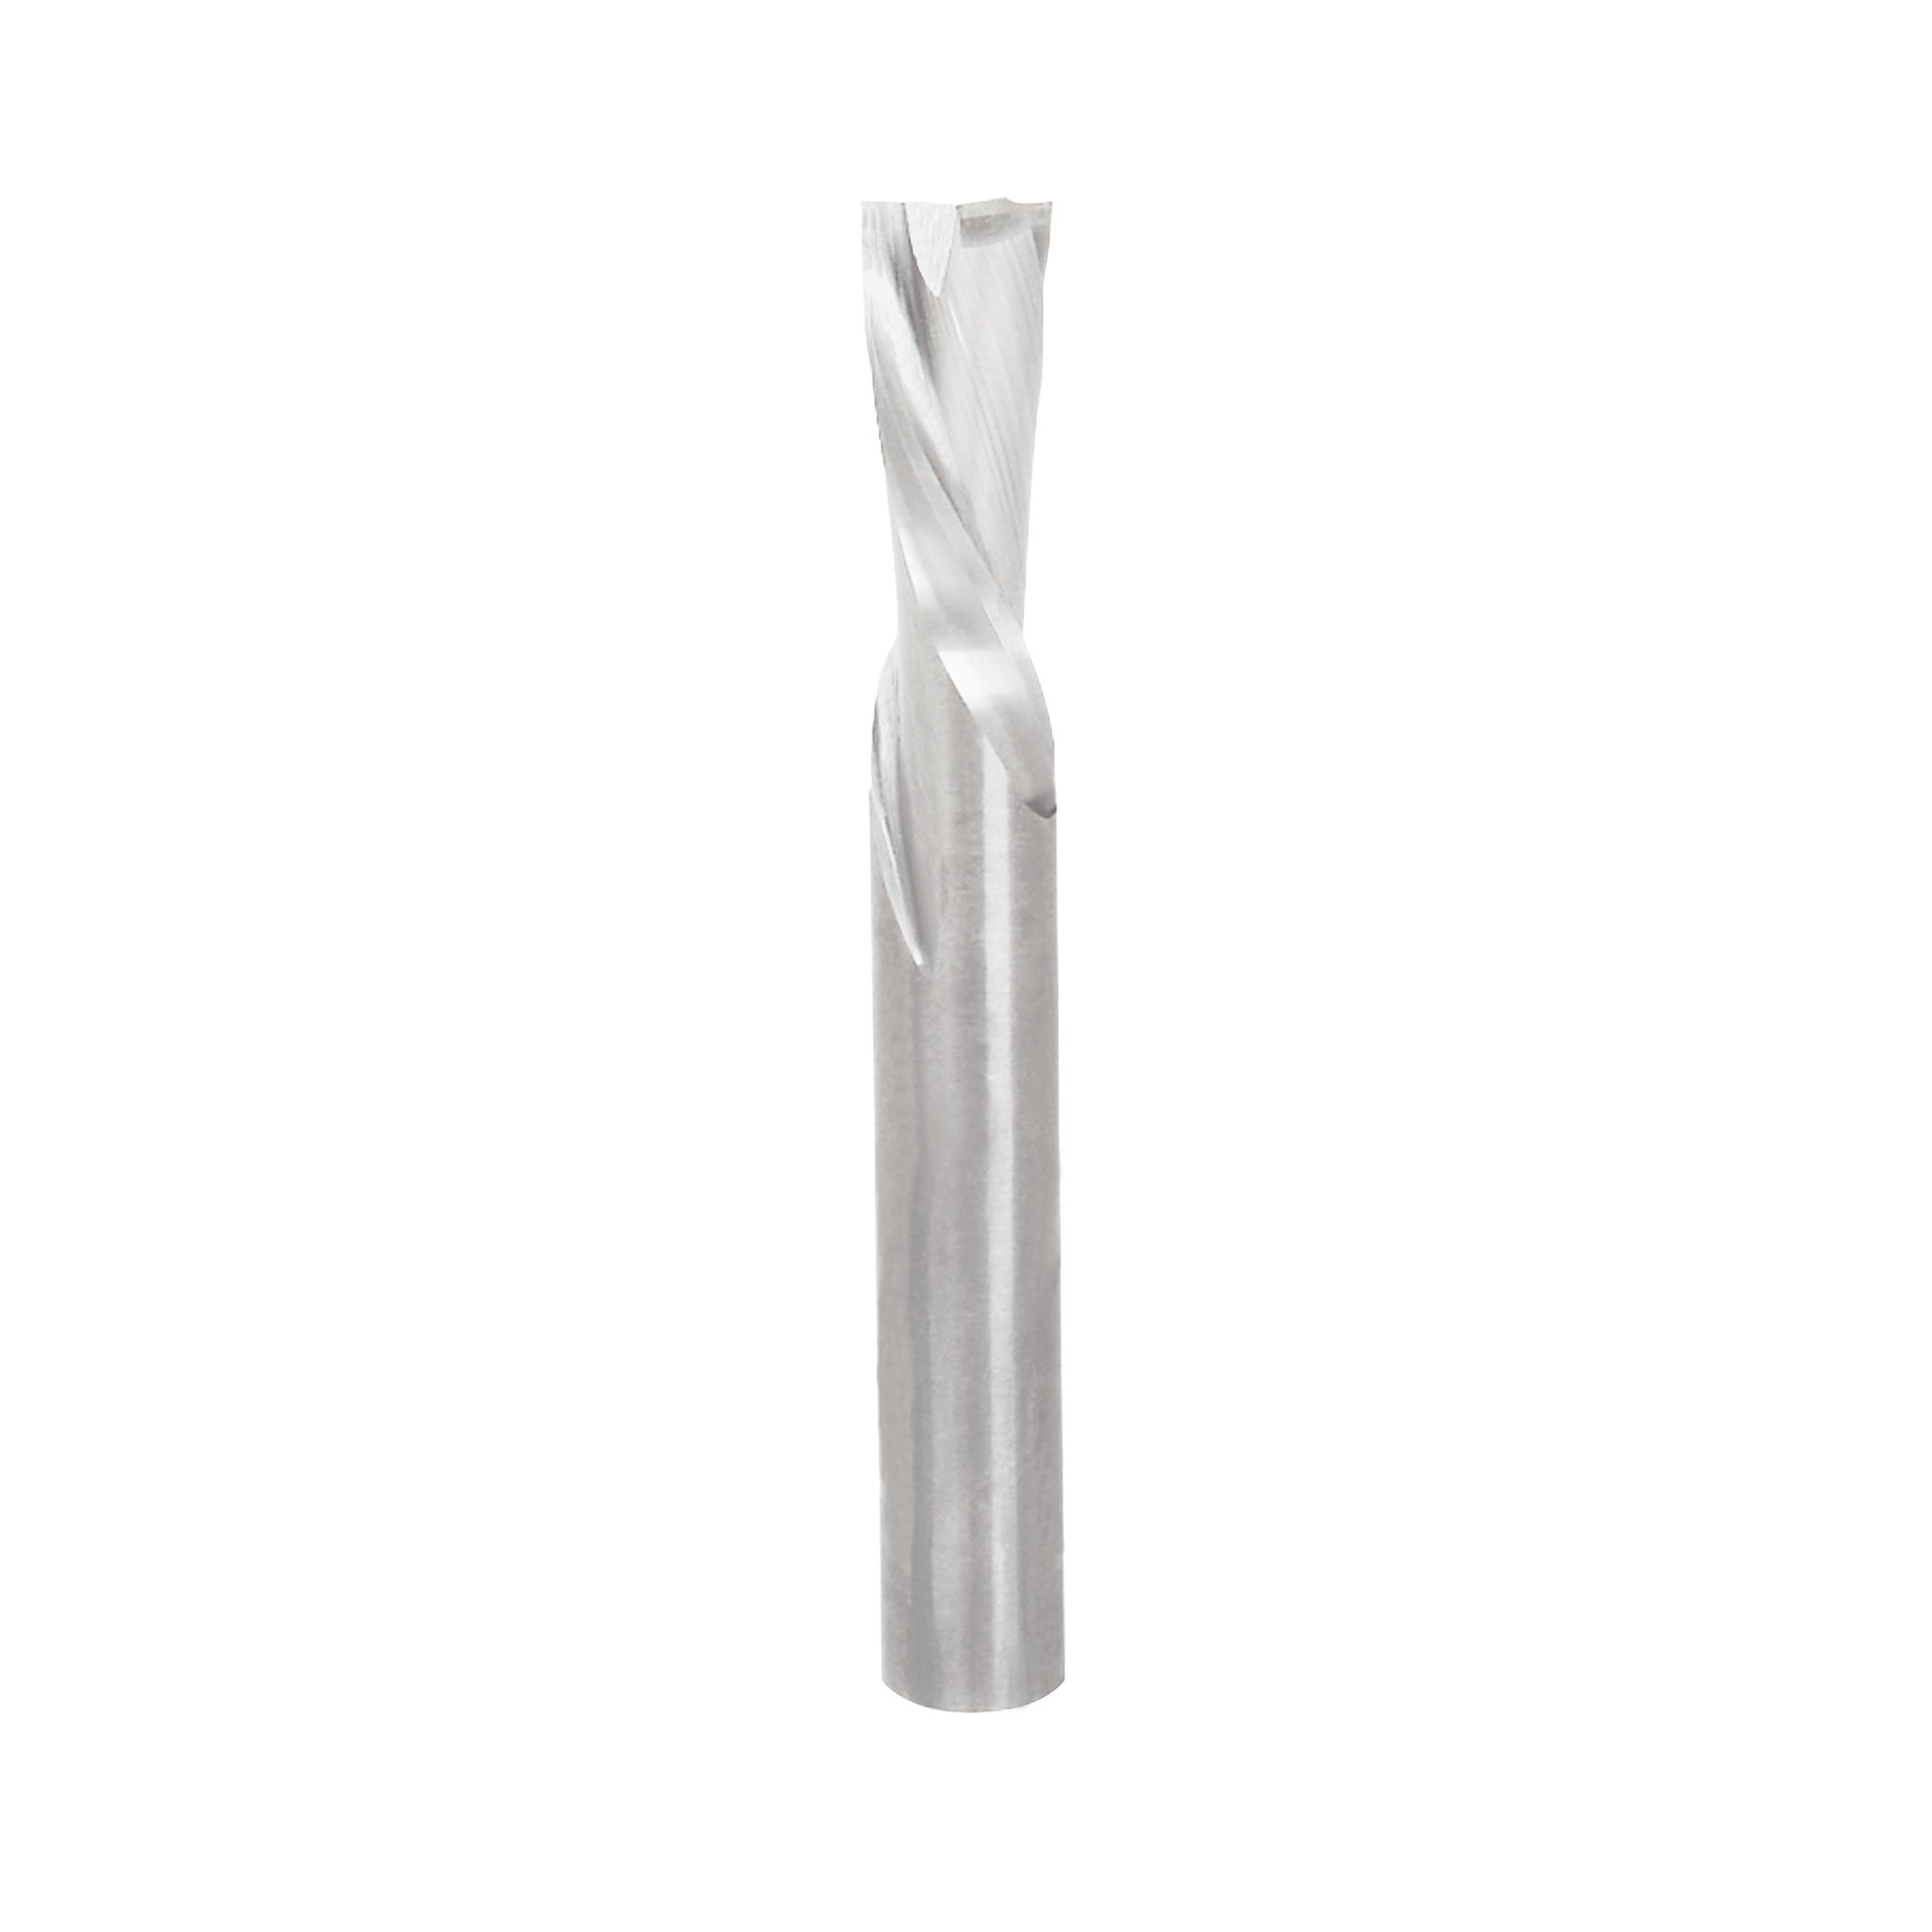 Freud  76-100 1/8" (Dia.) Down Spiral Bit with 1/4" Shank